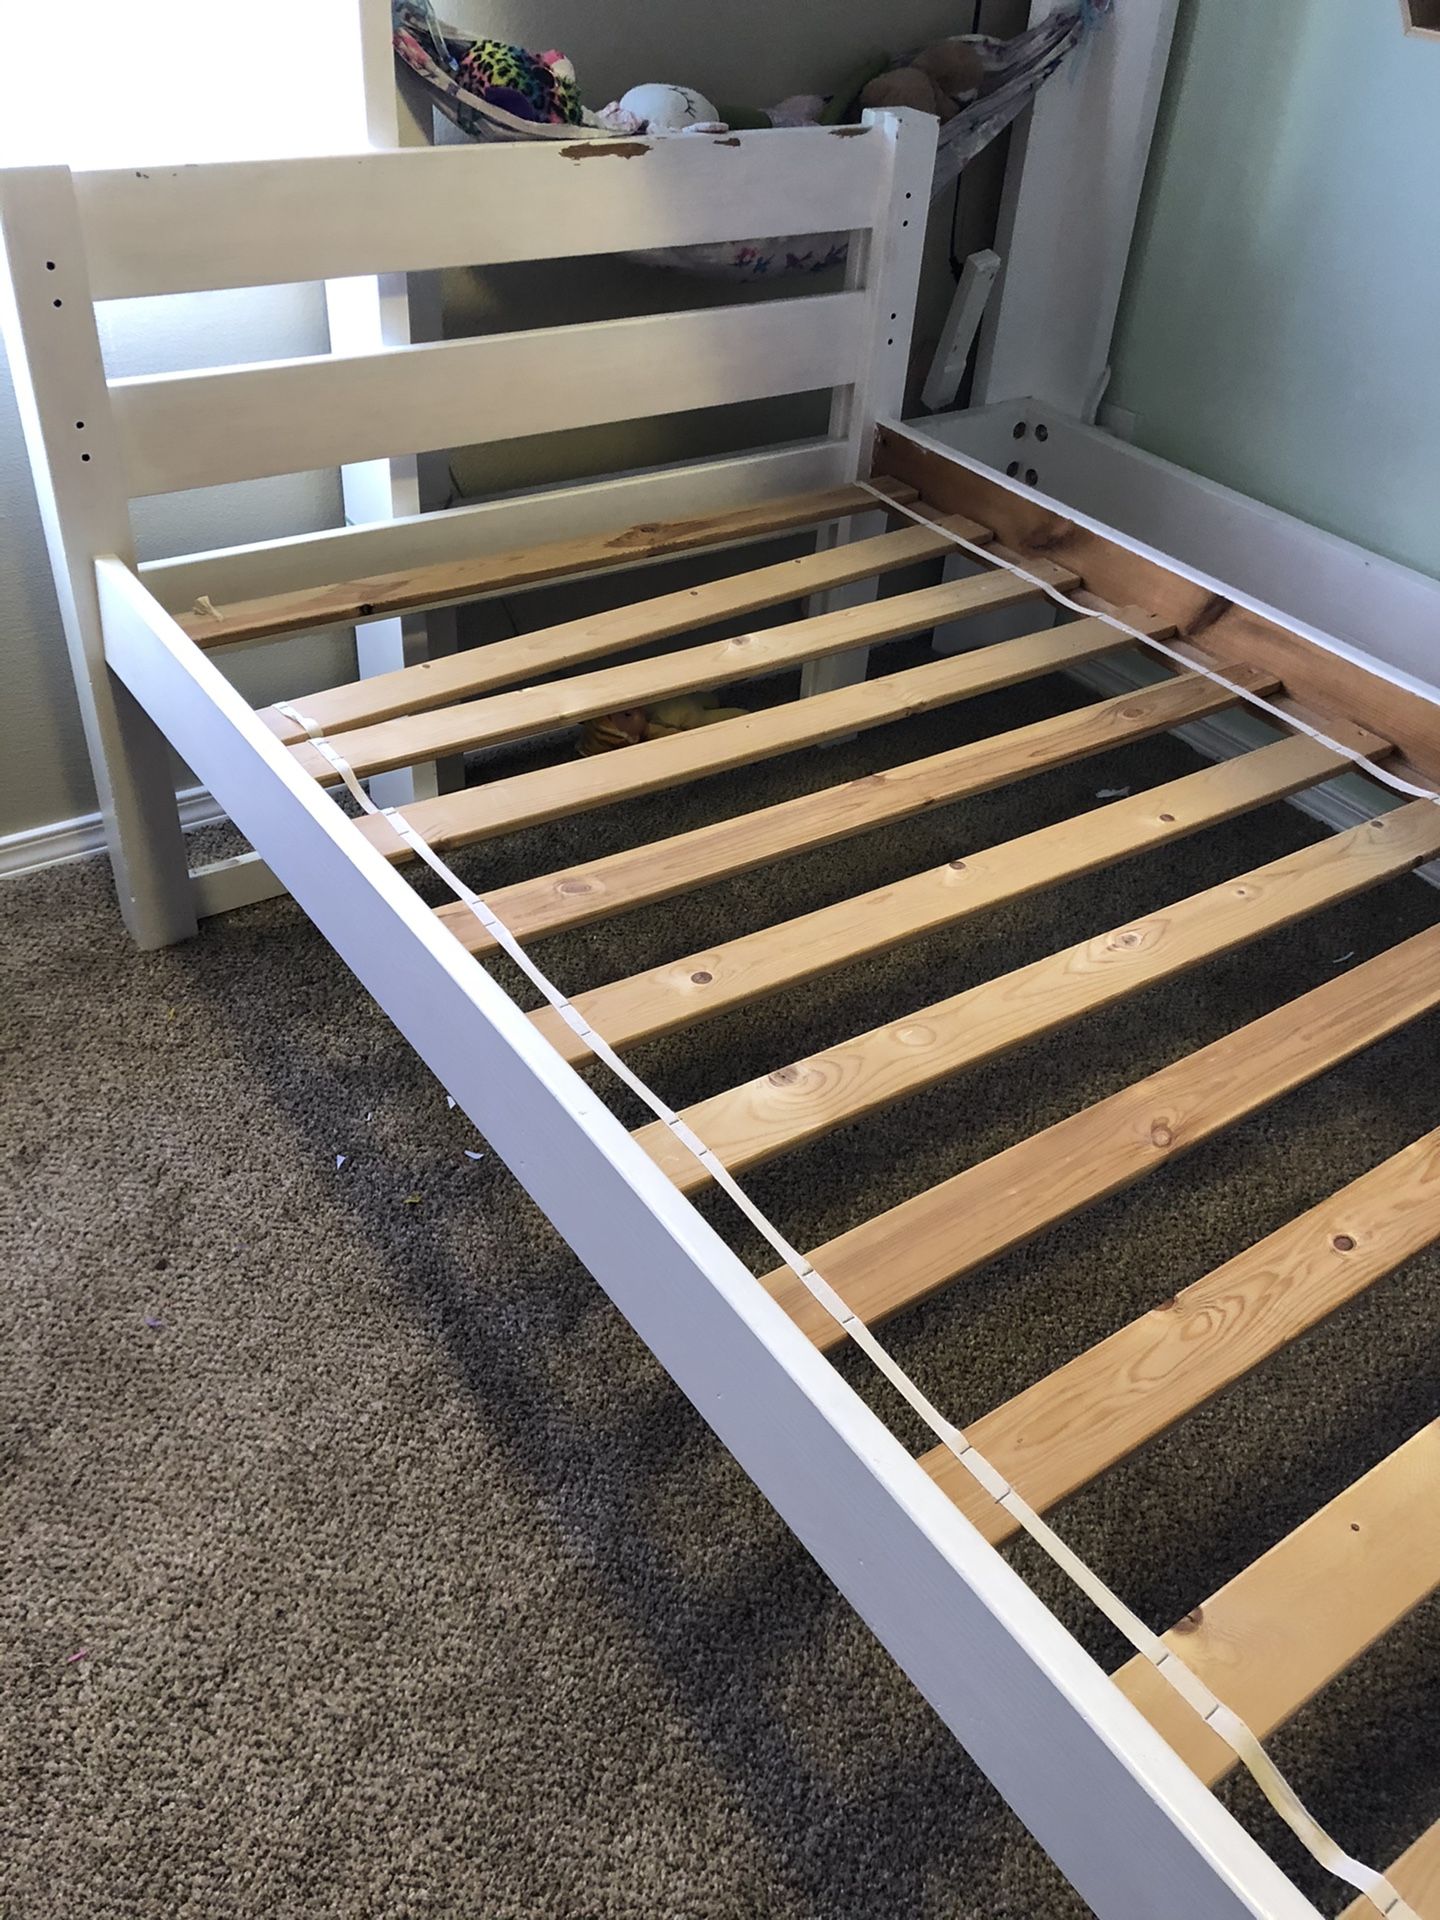 White painted twin bed frame